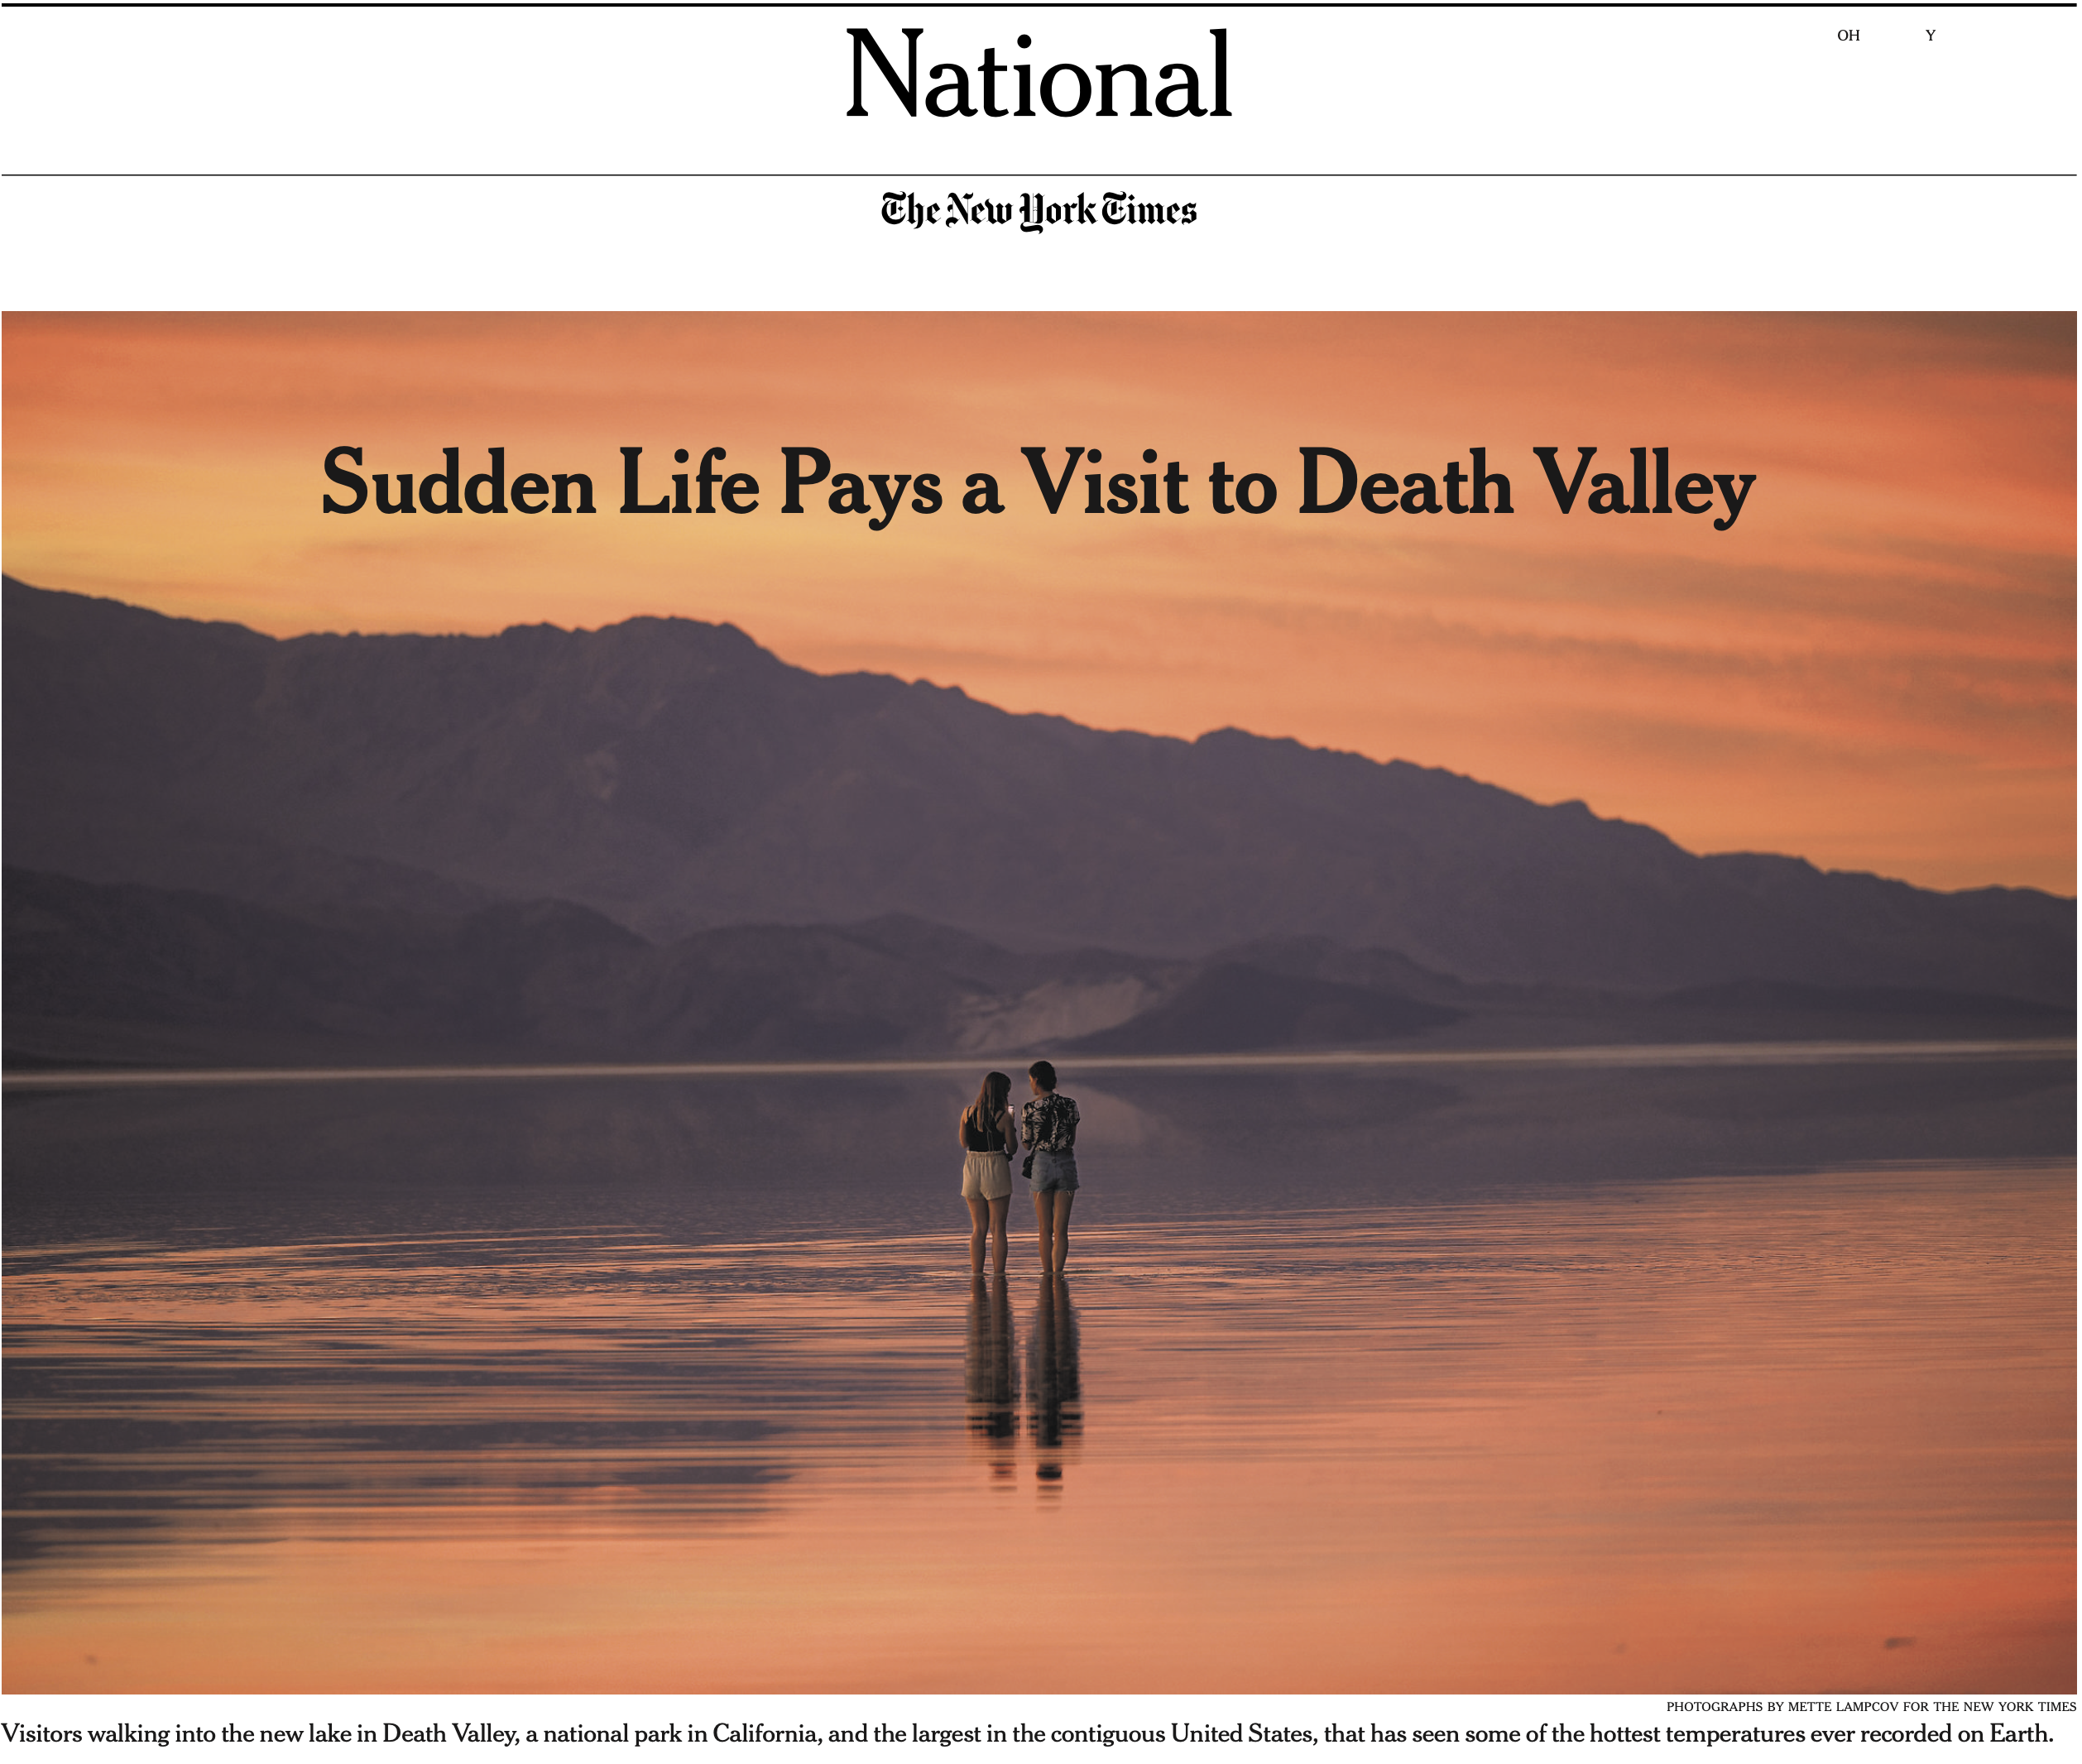 The New York Times: In Death Valley, a Rare Lake Comes Alive